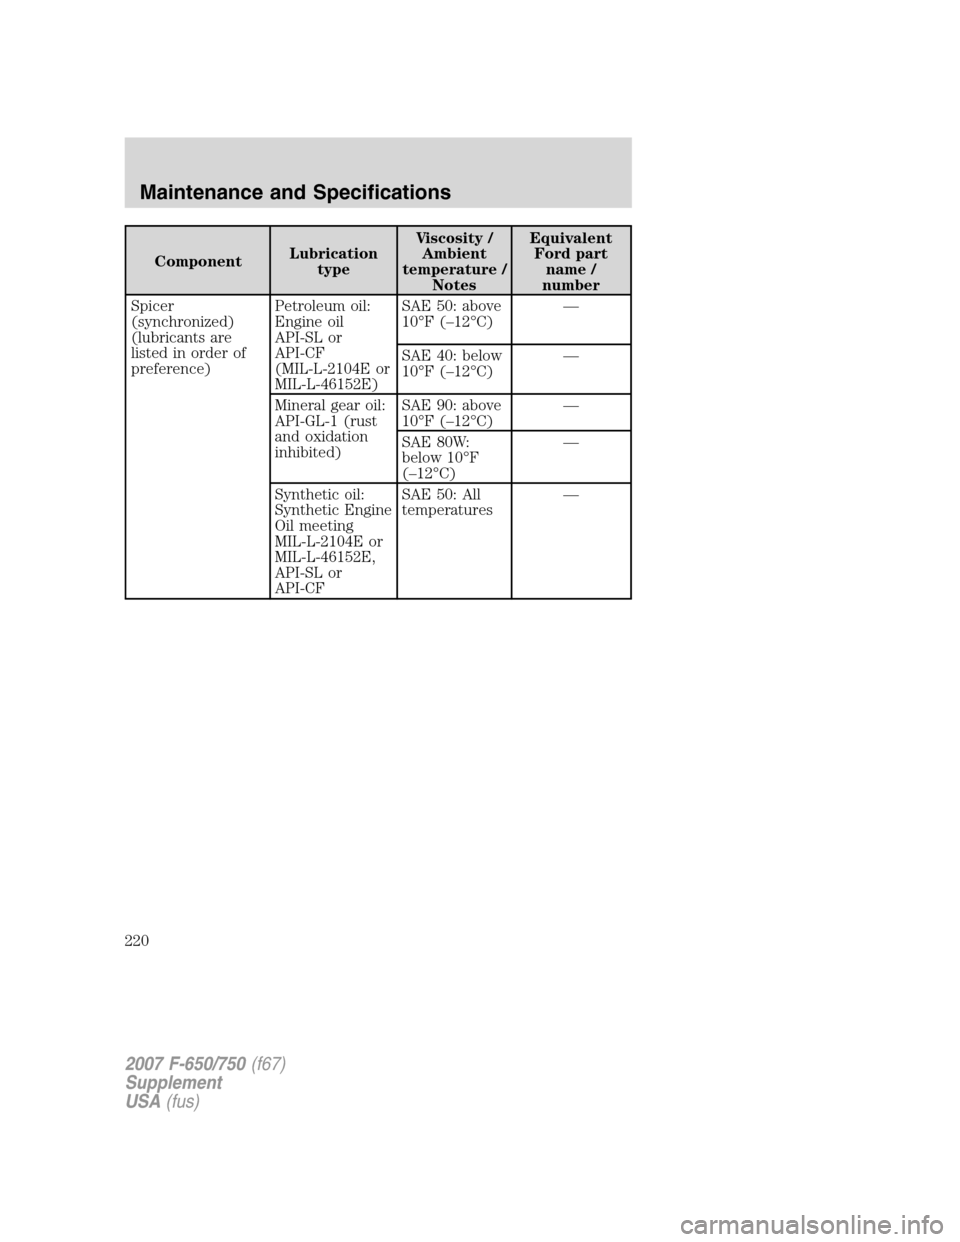 FORD F650 2007 11.G Owners Manual ComponentLubrication
typeViscosity /
Ambient
temperature /
NotesEquivalent
Ford part
name /
number
Spicer
(synchronized)
(lubricants are
listed in order of
preference)Petroleum oil:
Engine oil
API-SL 